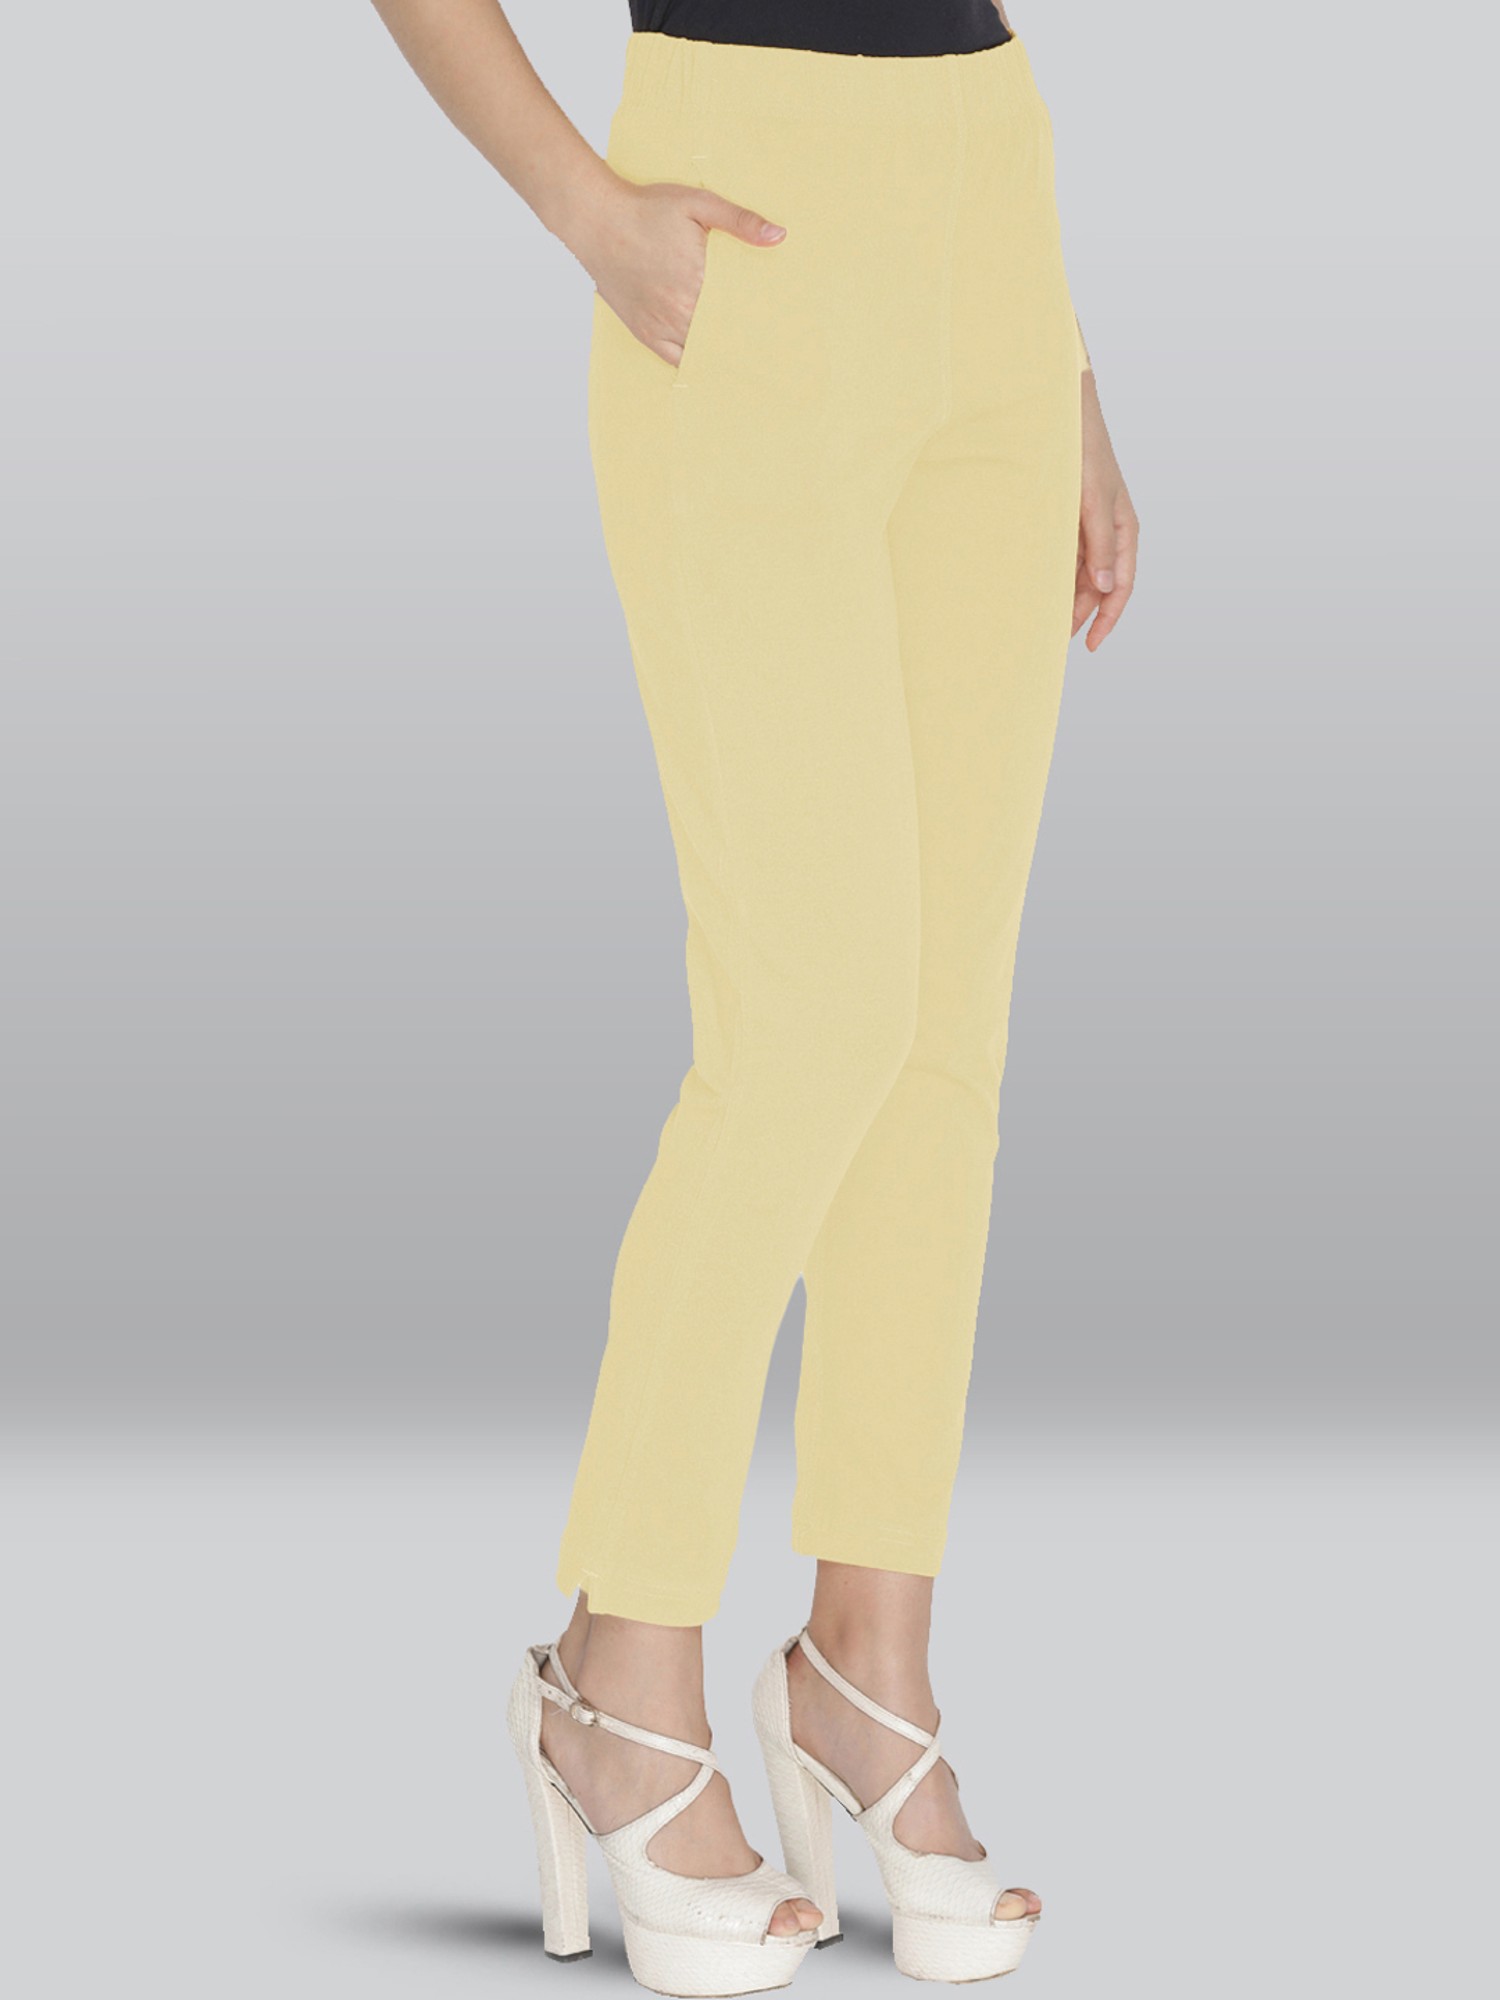 Women's High-rise Slim Fit Ankle Pants - A New Day™ Cream 26 : Target